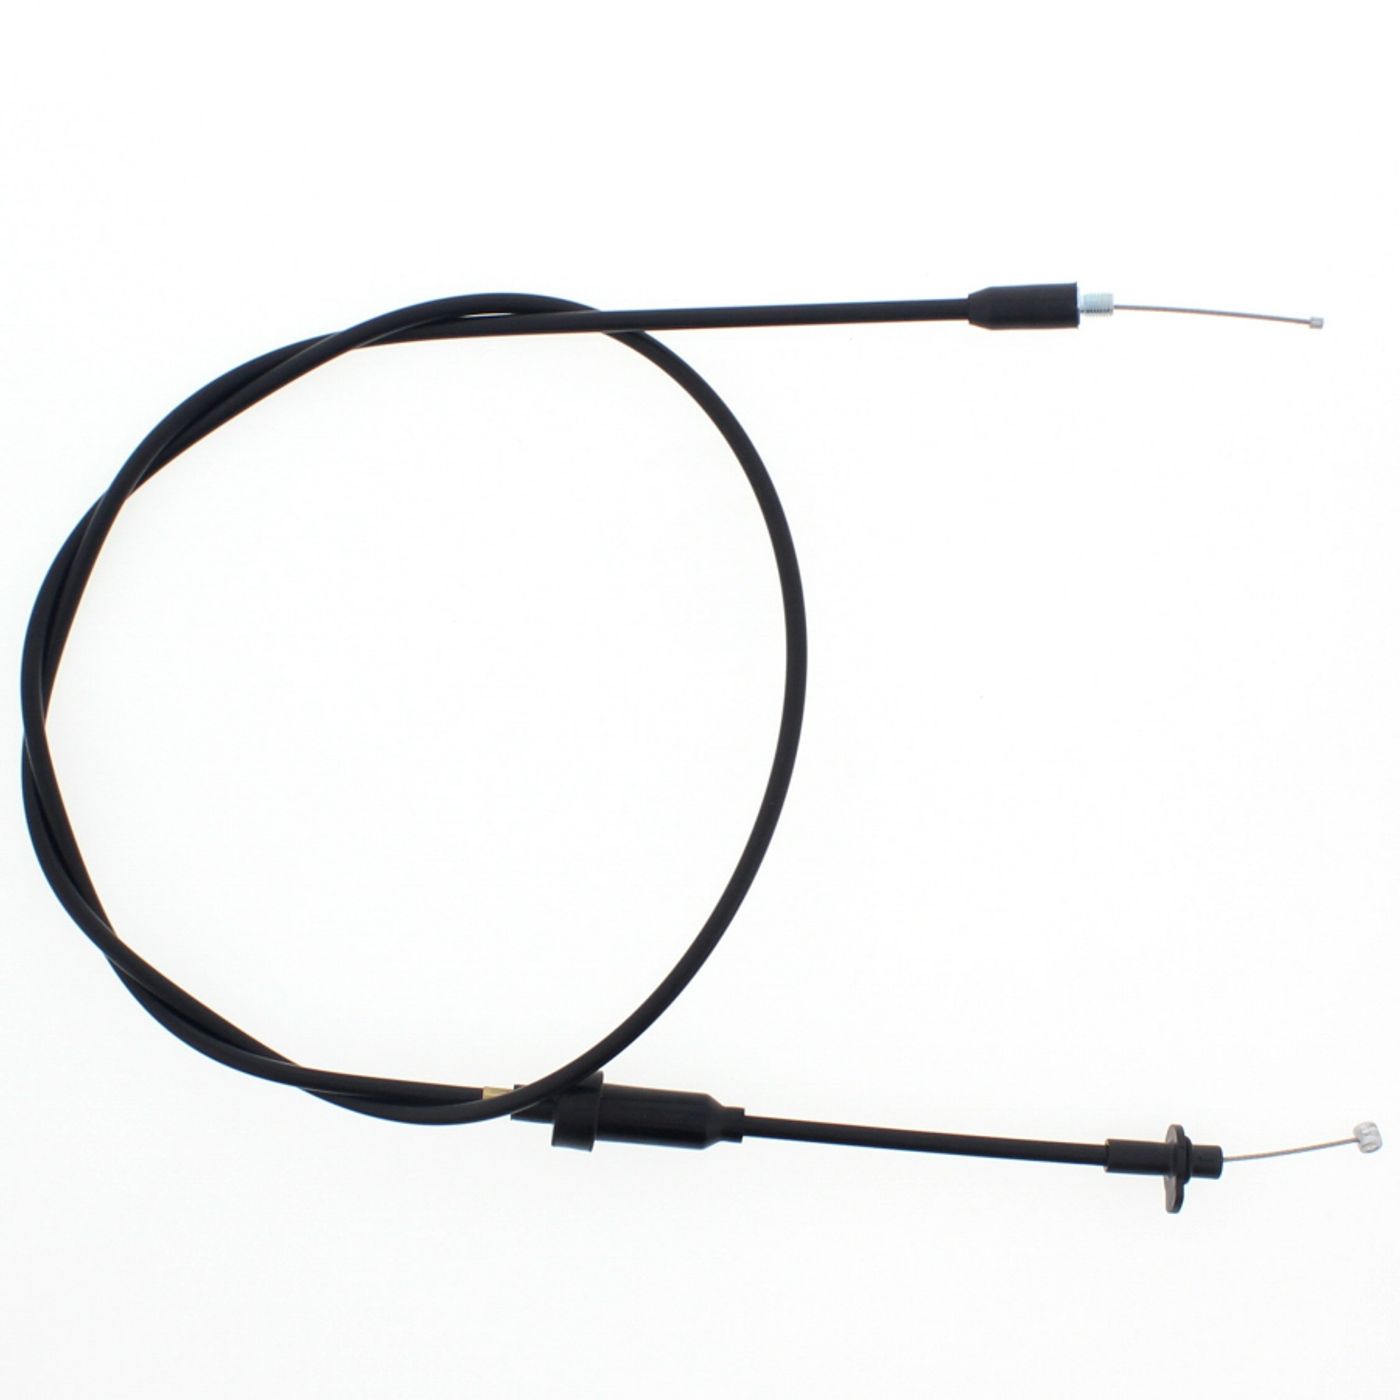 Wrp Throttle Cables - WRP451153 image